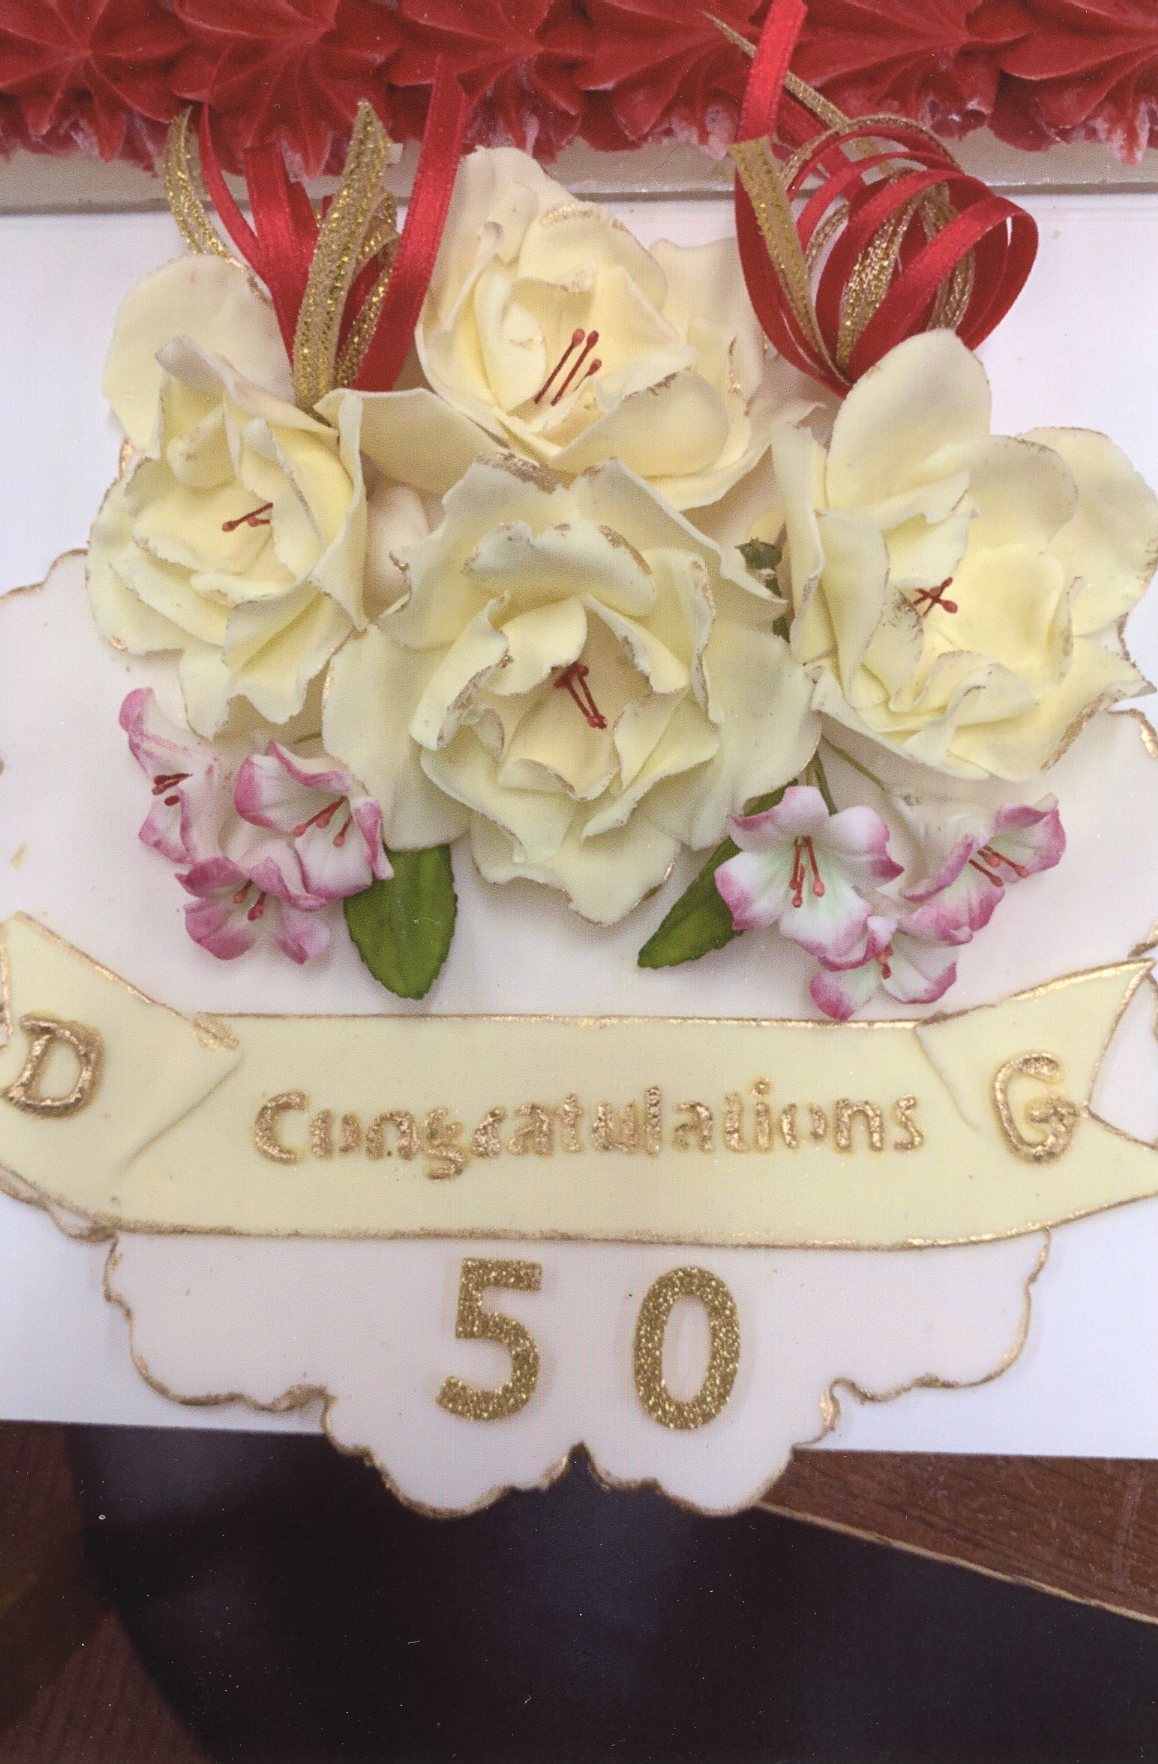 A plaque made with royal fondant icing especially for the 50th celebrations by Dawn Armstrong, who was the original decorator of the couple’s wedding cake 50 years ago.